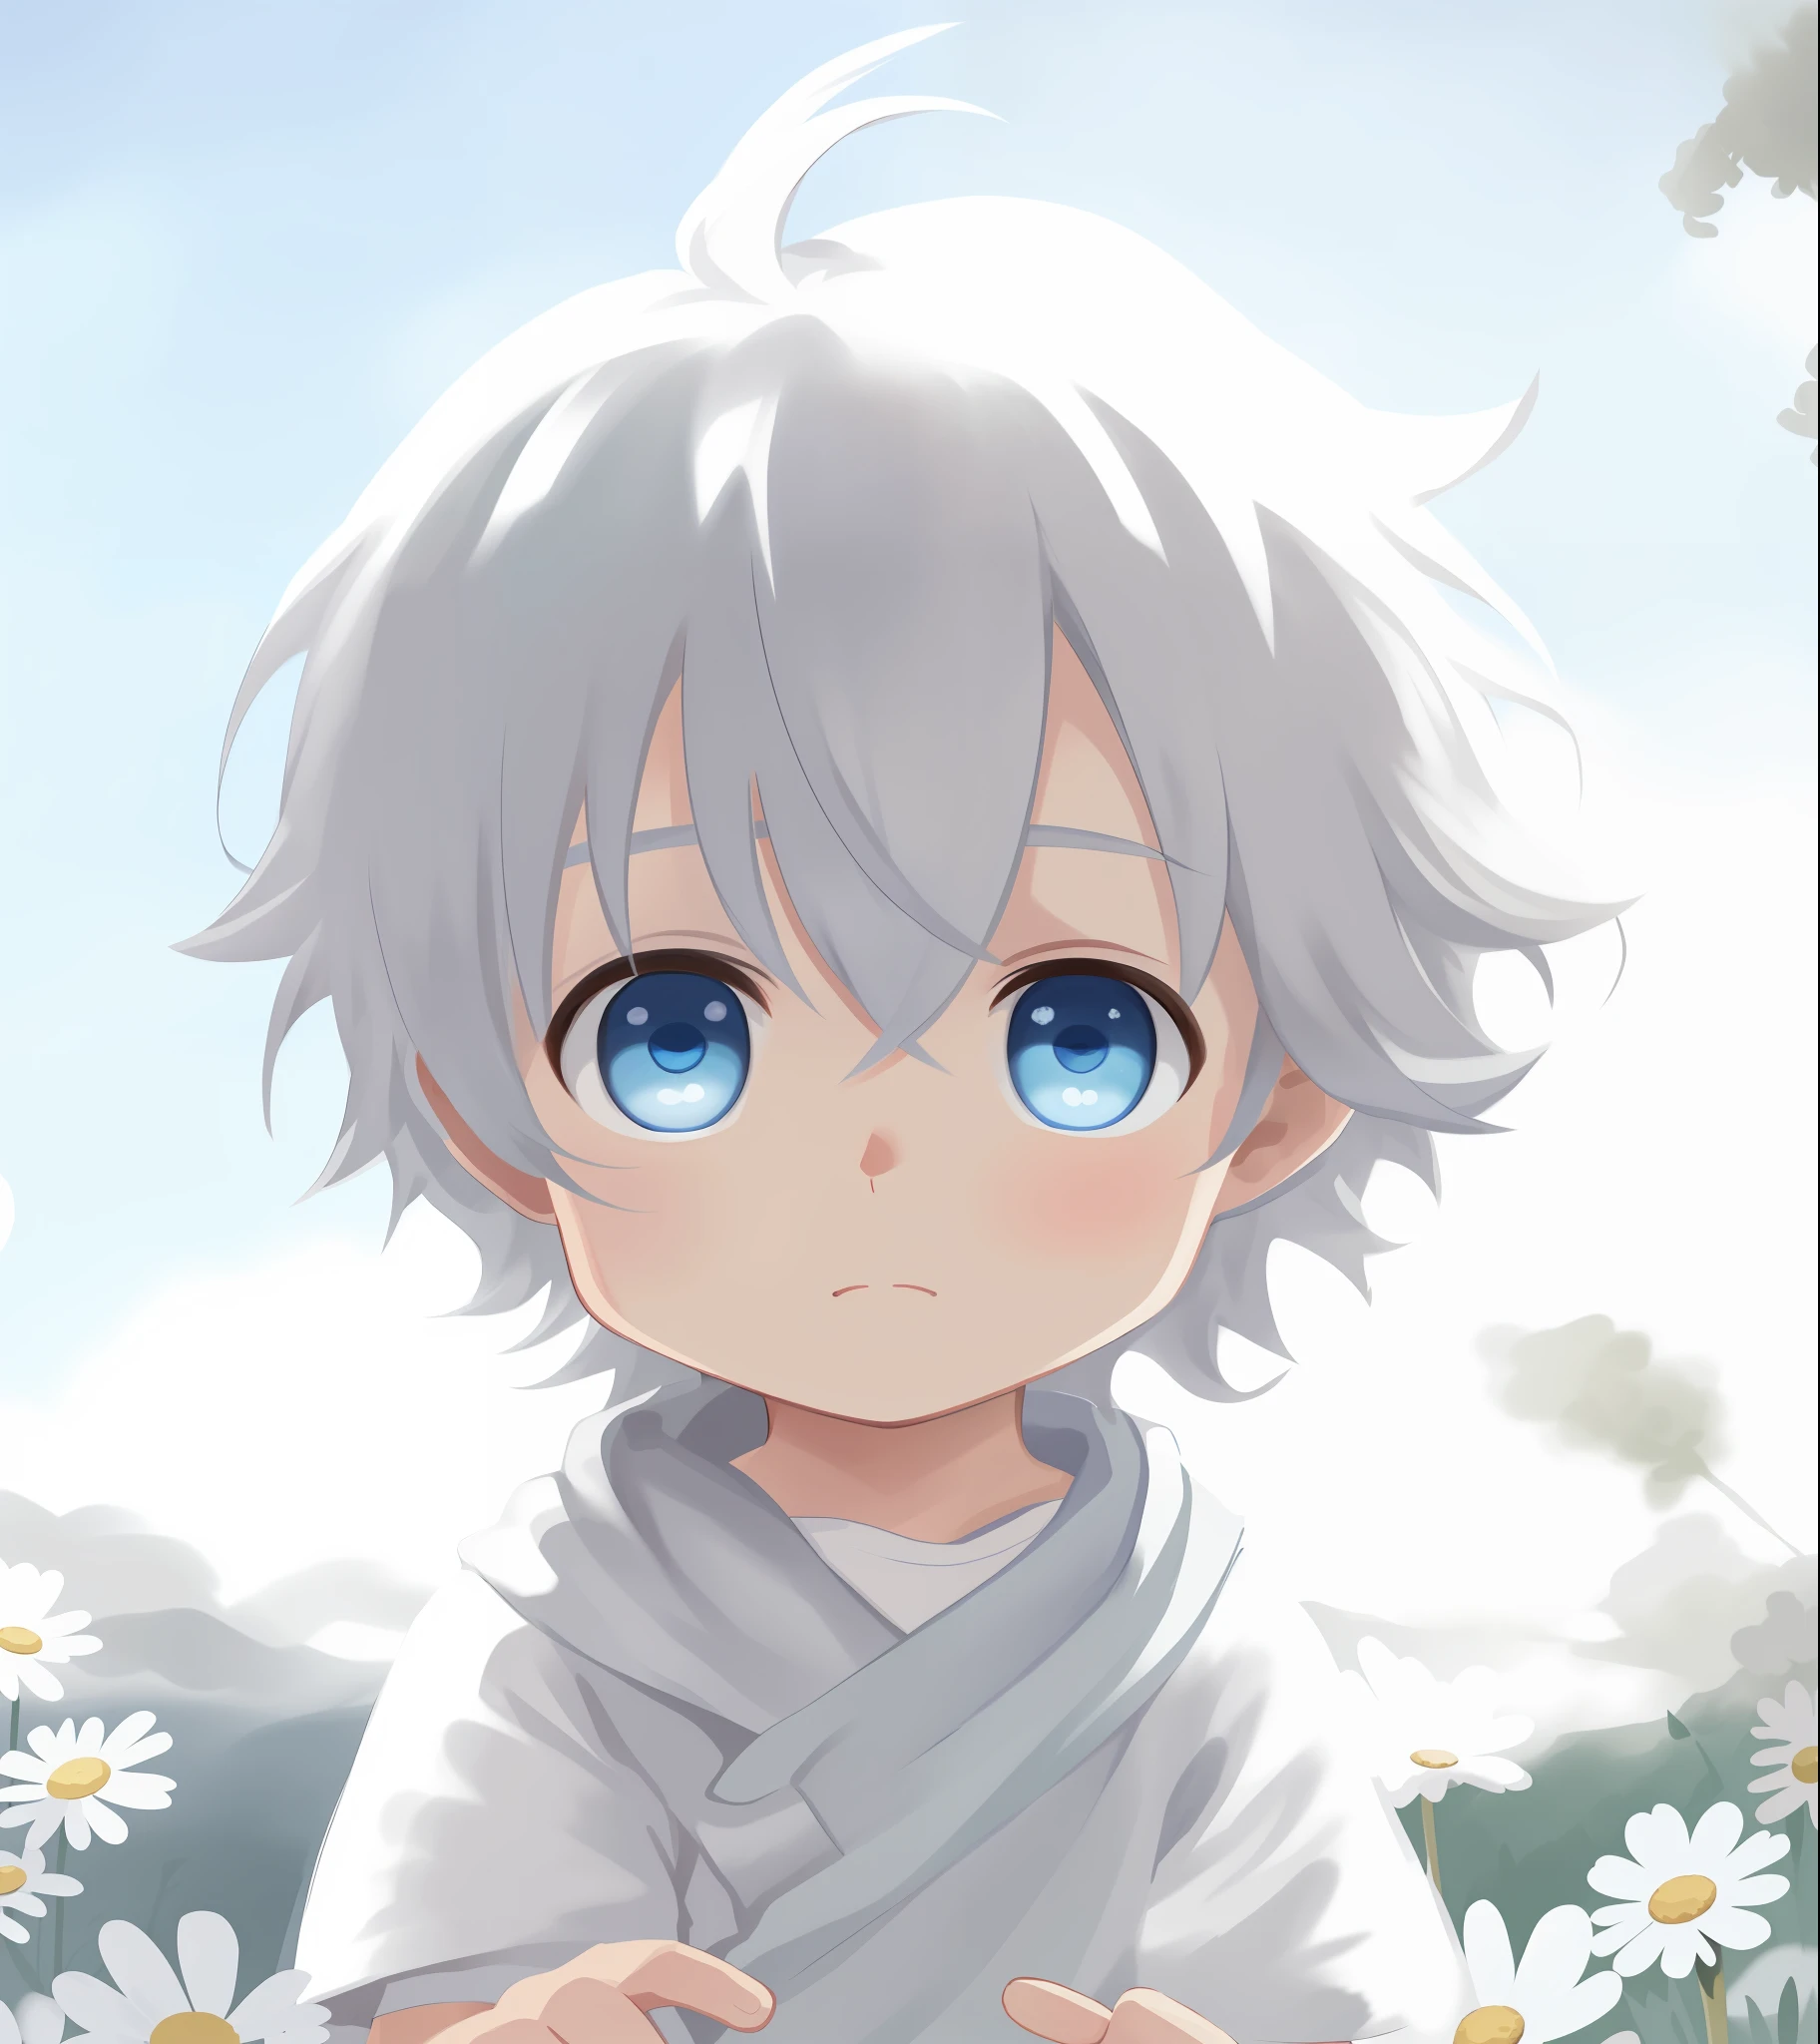 White-haired, blue-eyed little Shota in the sea of daisies